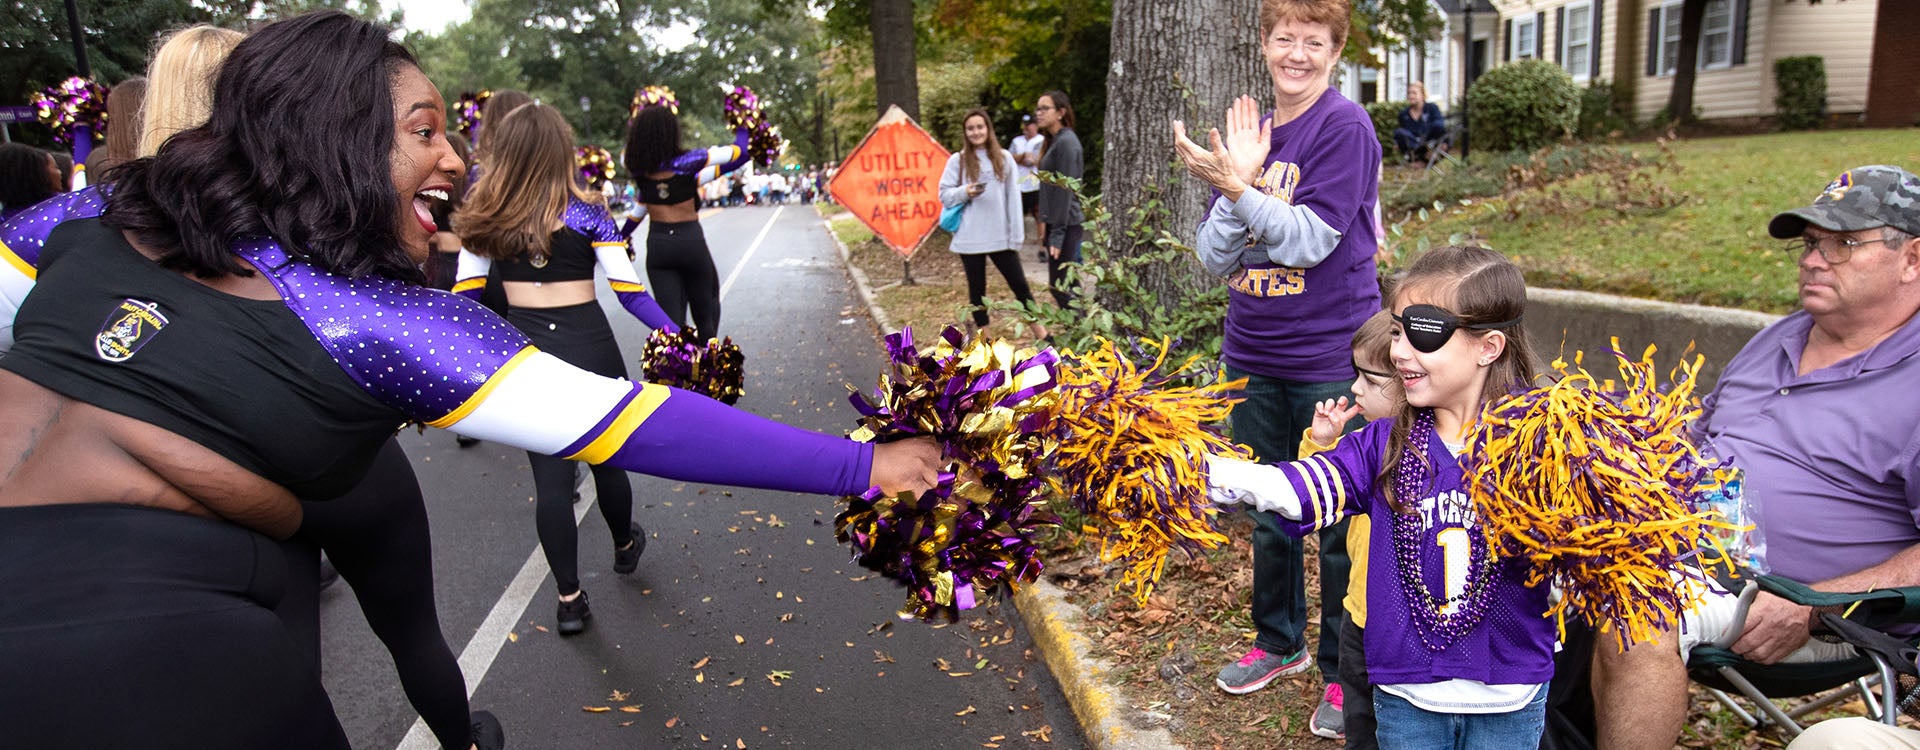 A member of the ECU Club Dance team shares a moment with a young Pirate fan during the Homecoming Parade on Saturday morning. (Photography by Rhett Butler)